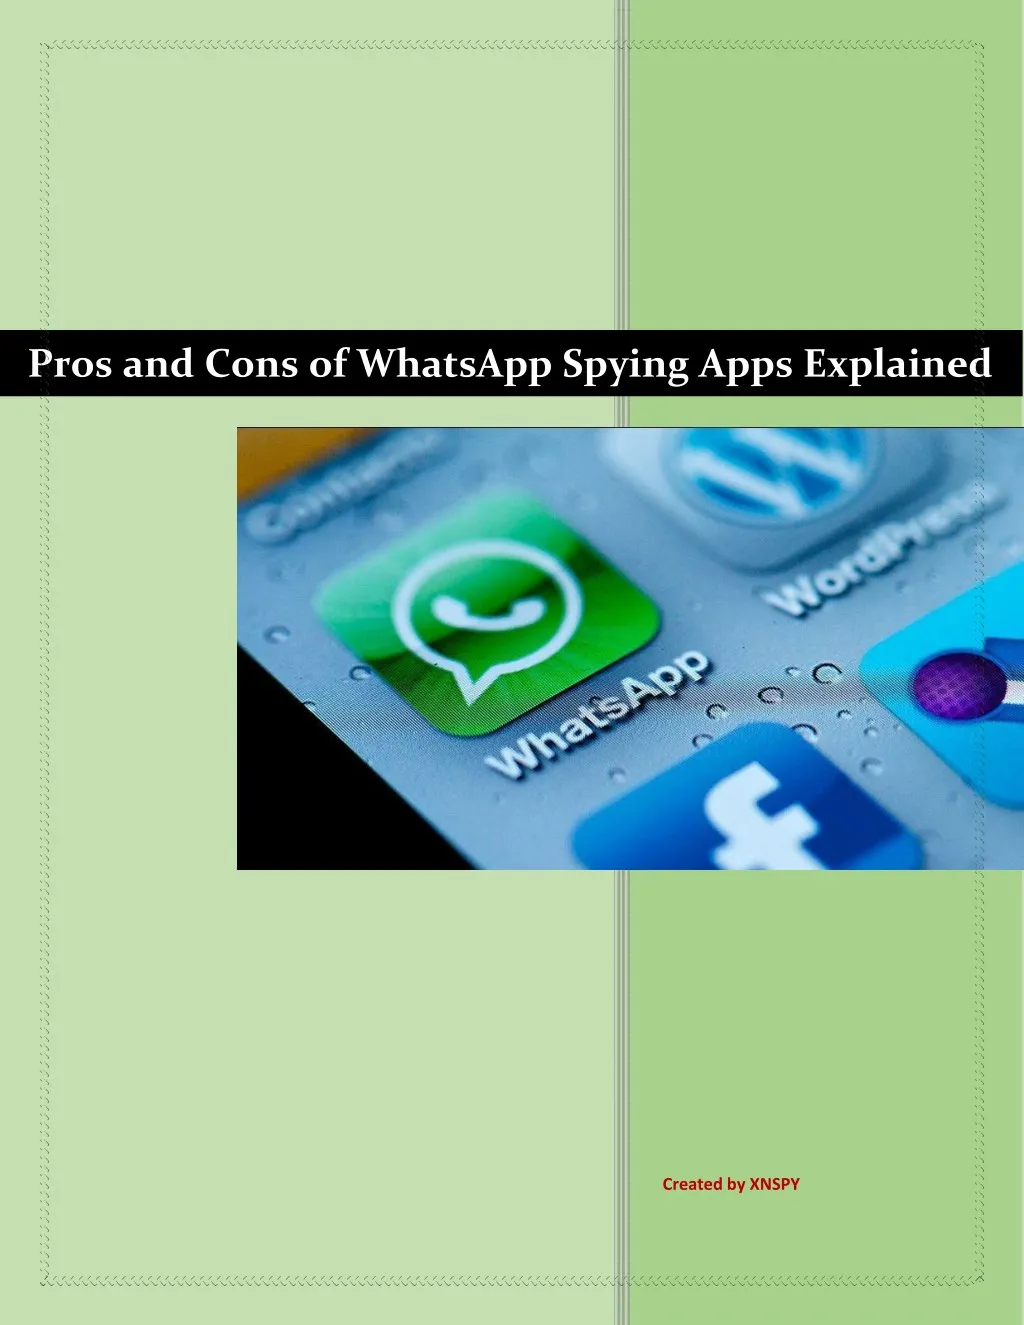 pros and cons of whatsapp spying apps explained